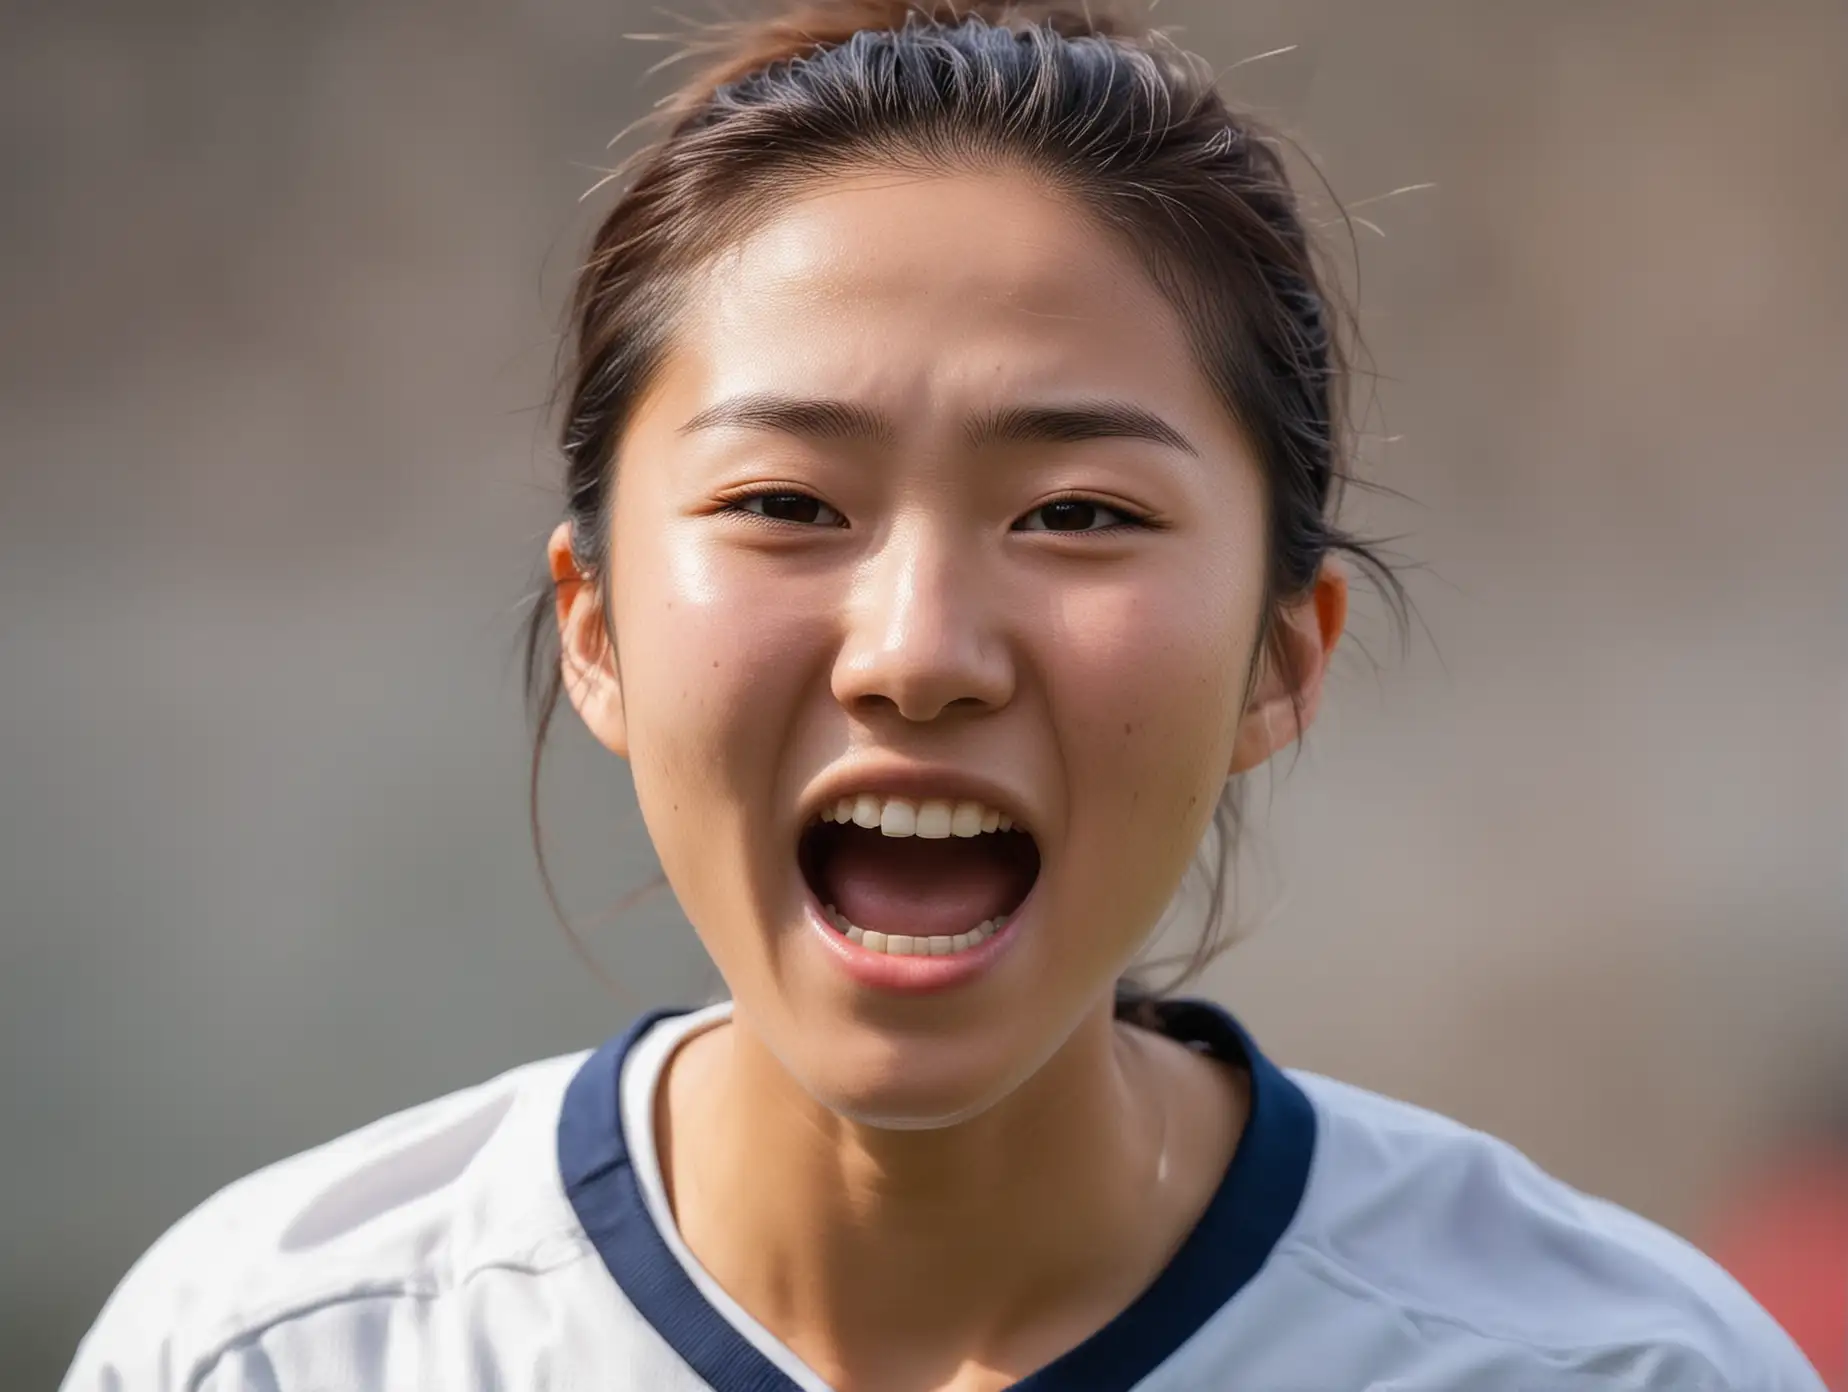 Close up natural face without make-up of a beautiful skinny Japanese women's college soccer player joyfully celebrating a glorious goal.